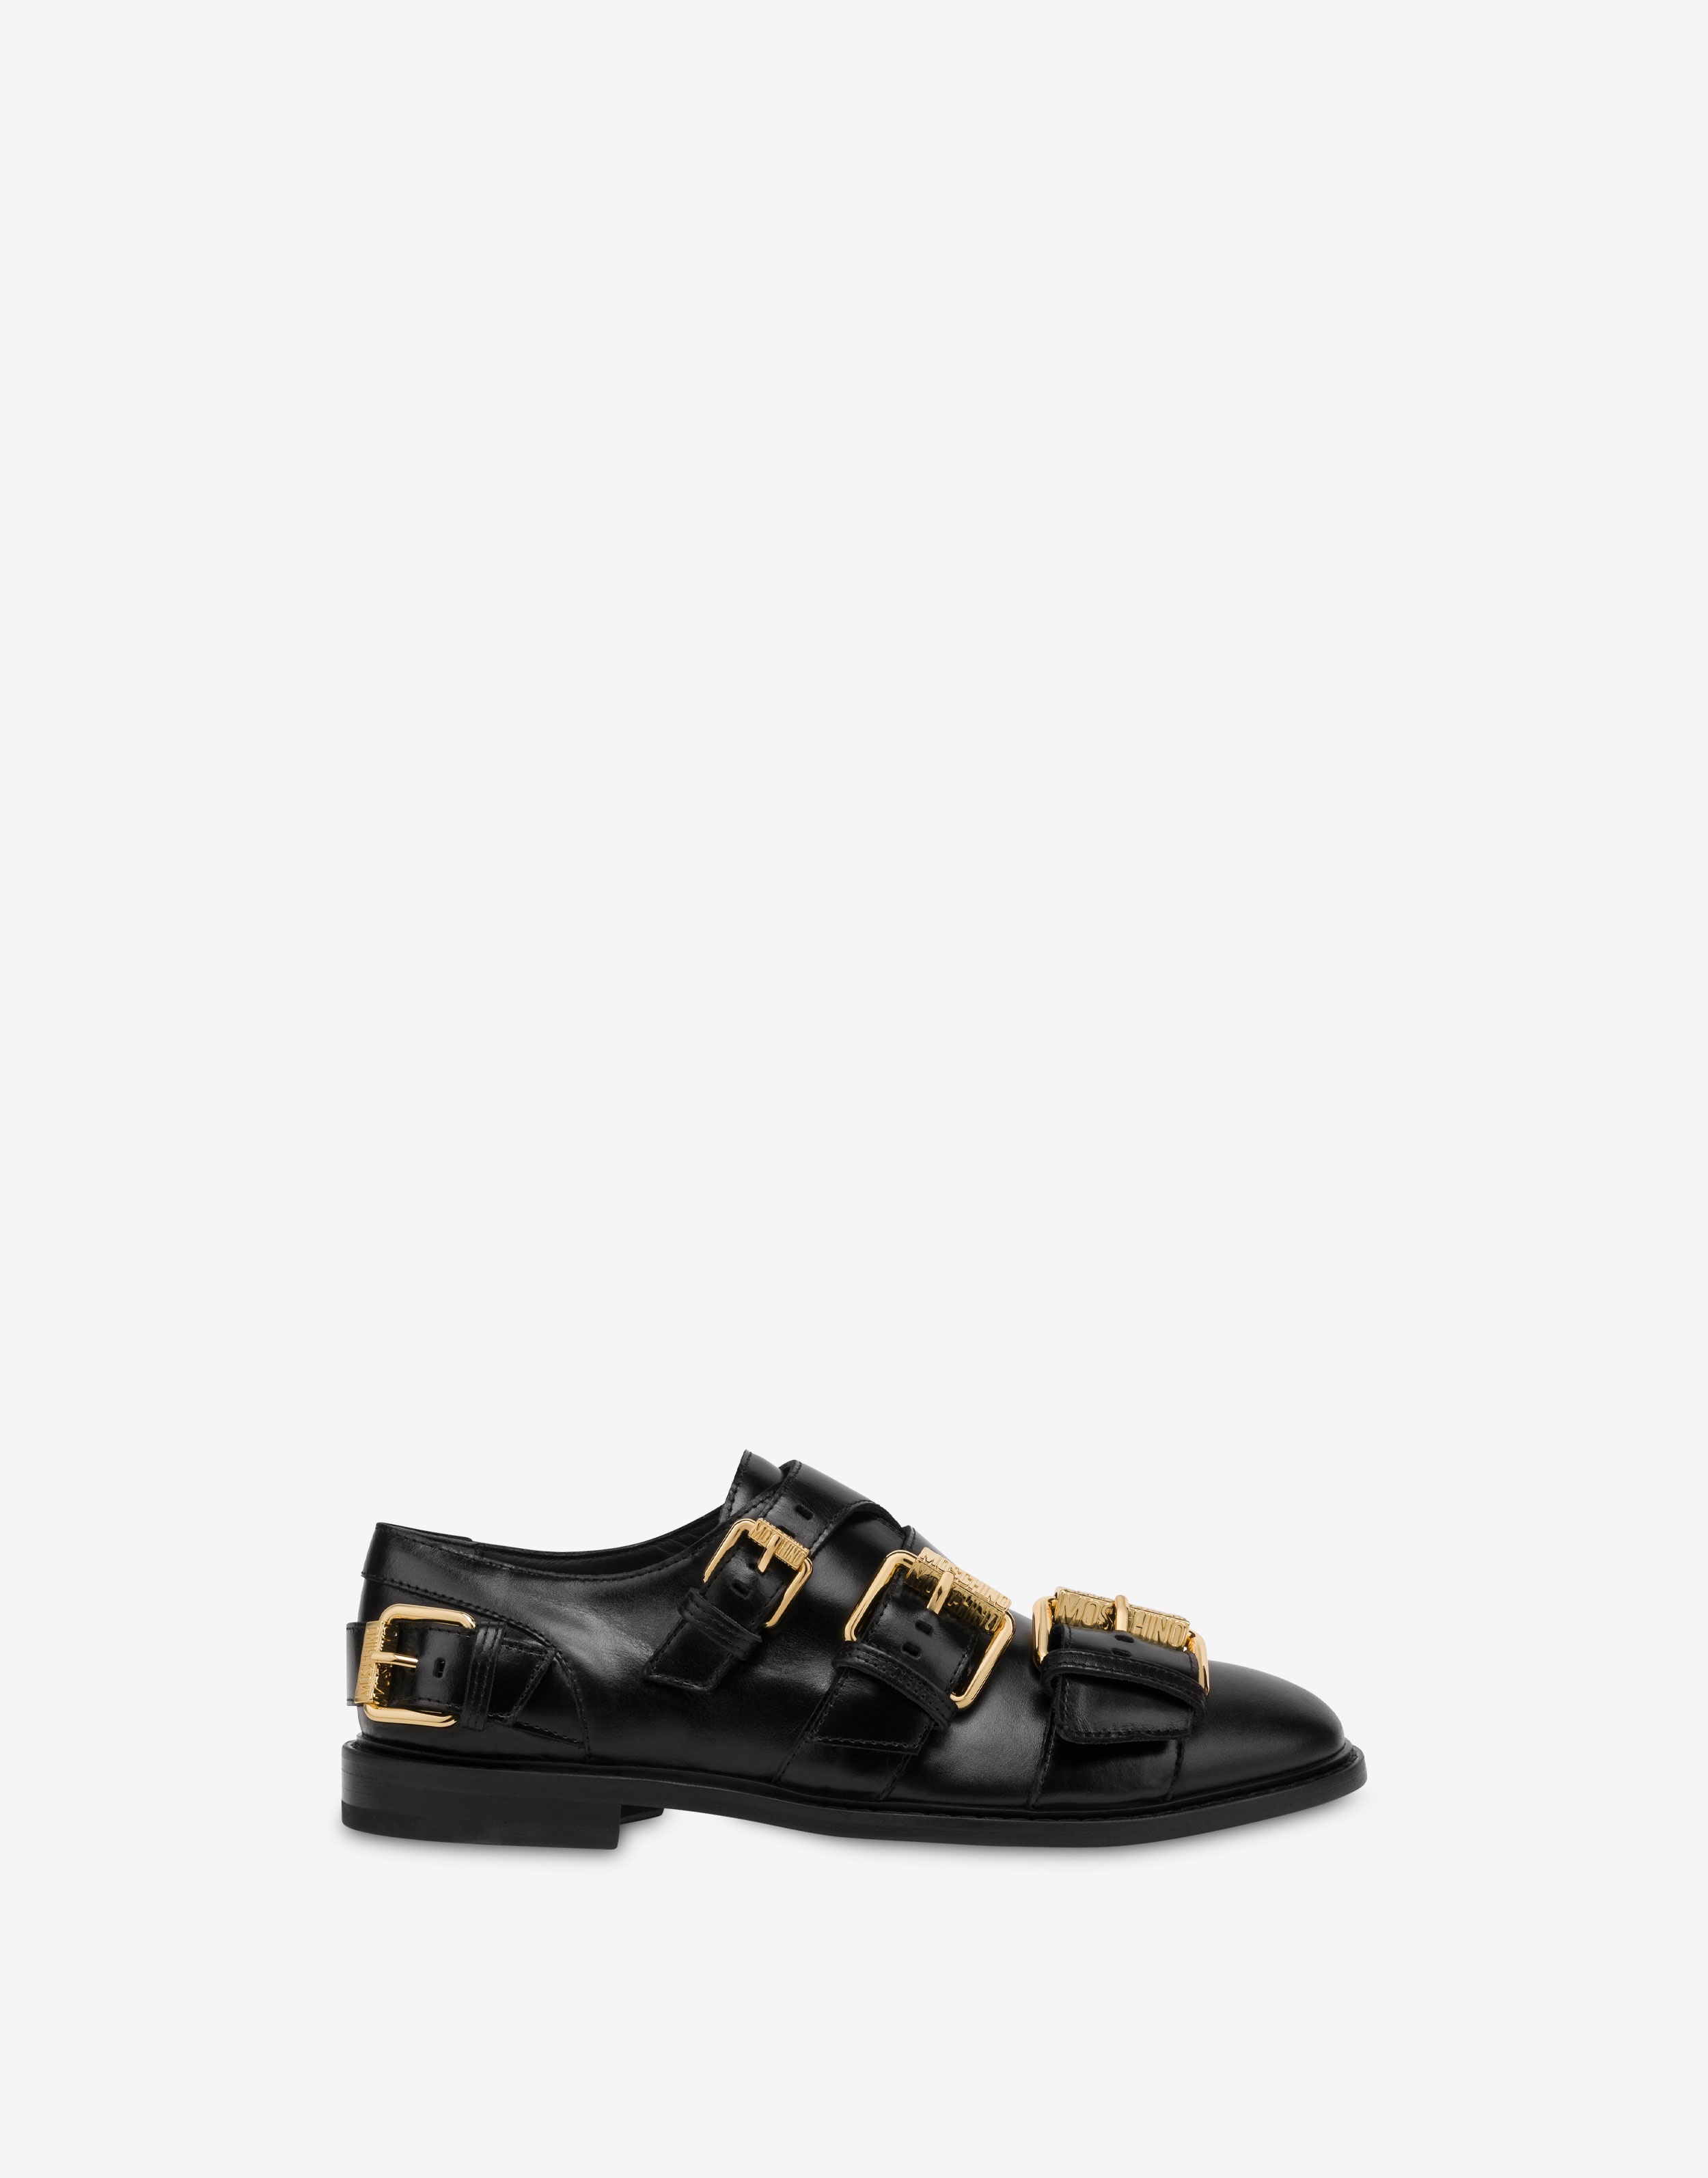 MULTI BUCKLES SHINY CALFSKIN LOAFERS - 2